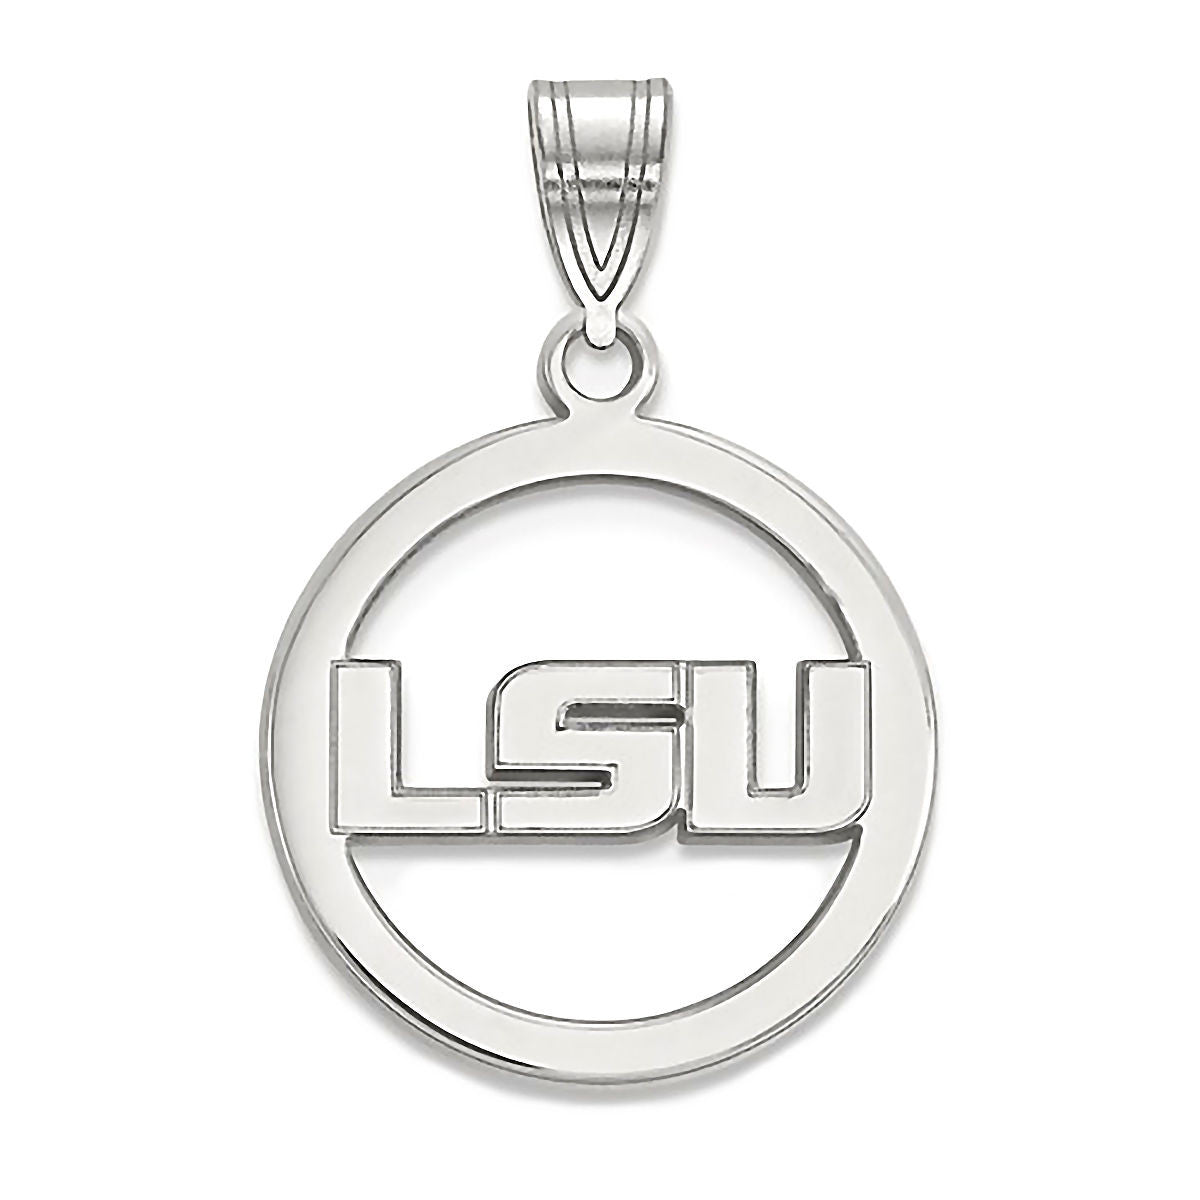 Louisiana state charm necklace